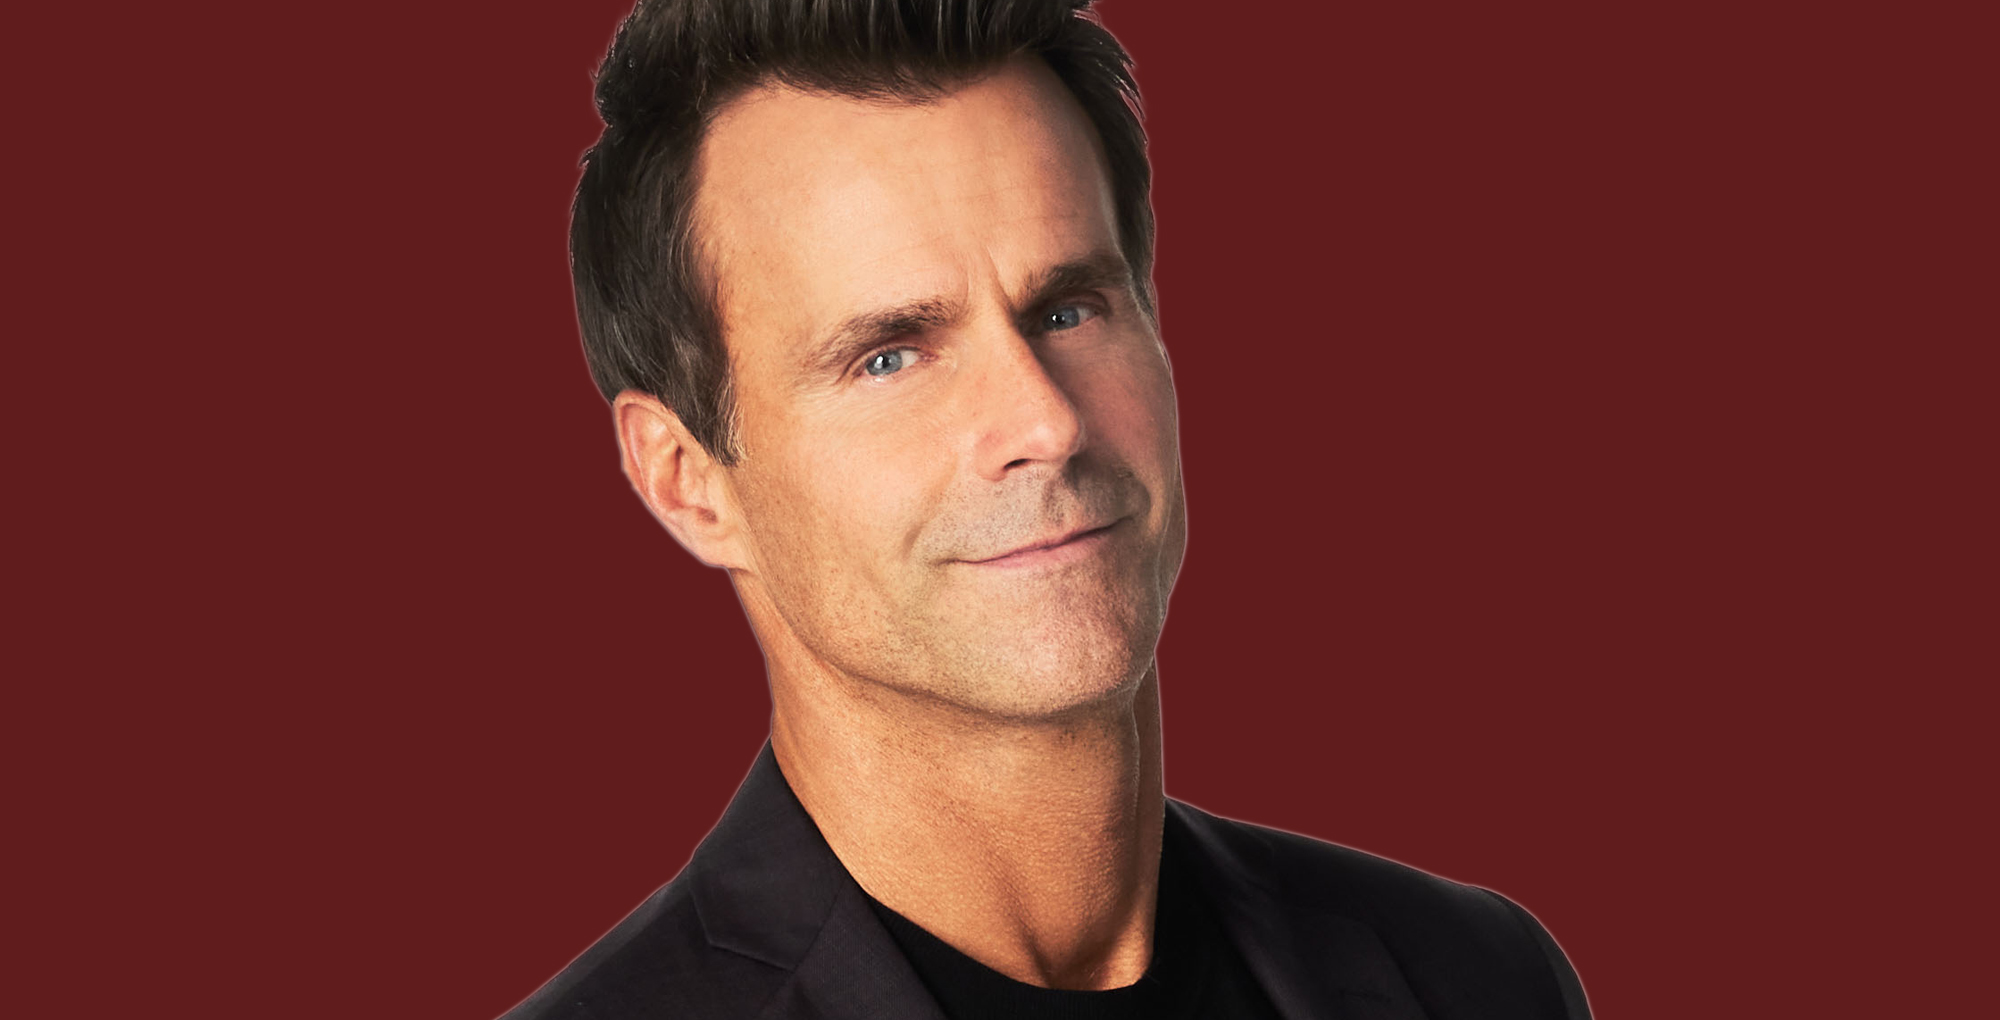 cameron mathison plays drew cain on general hospital.